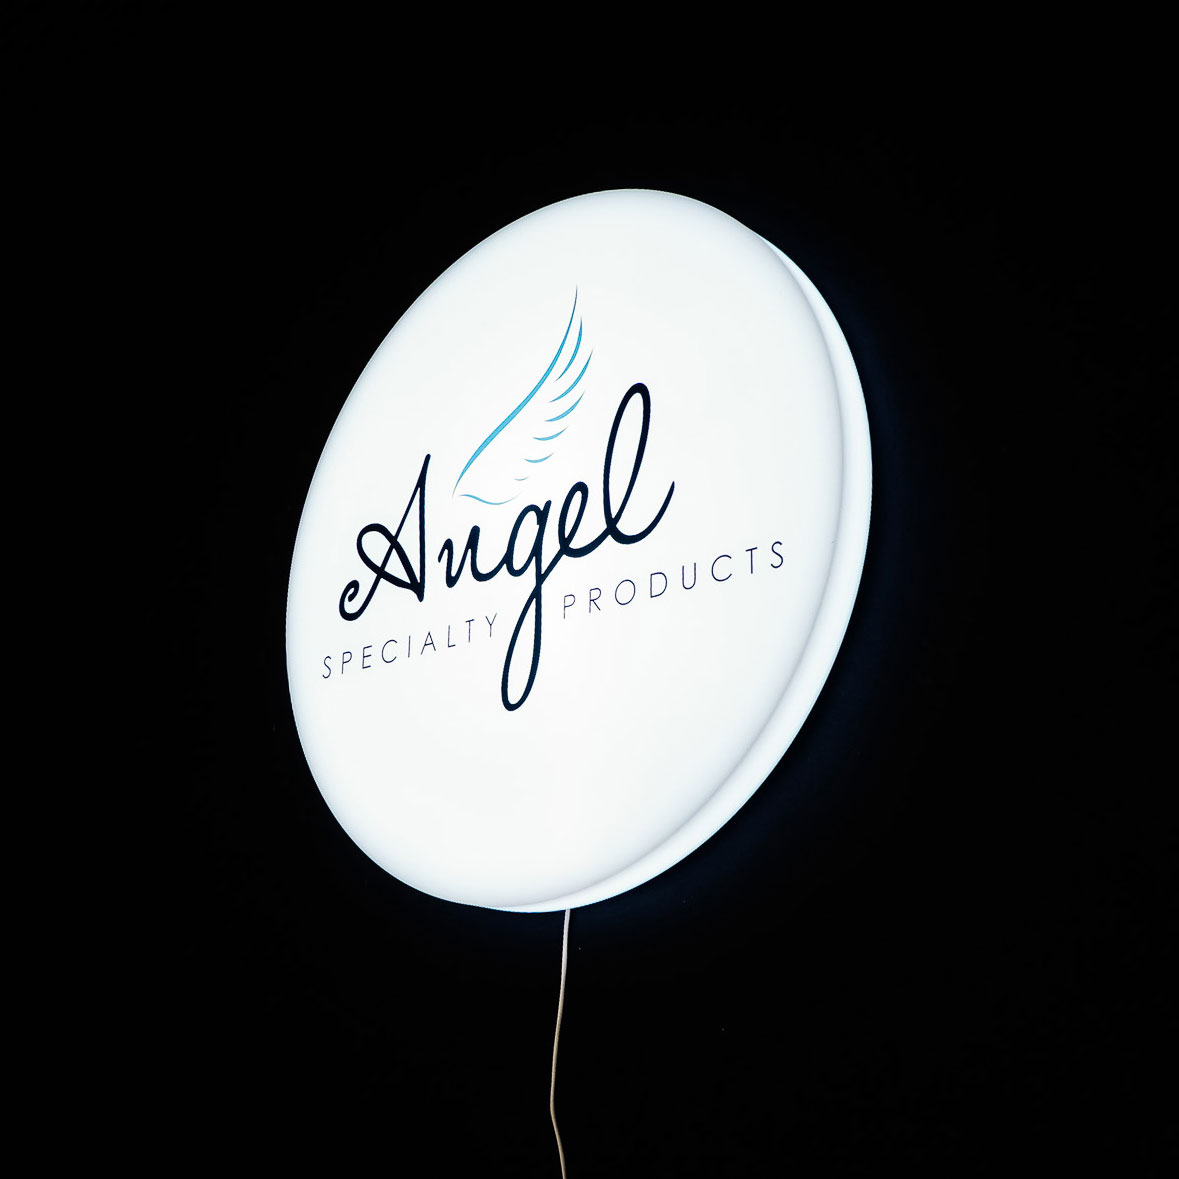 Illuminated, circular, face-lit sign for Angel Specialty Products